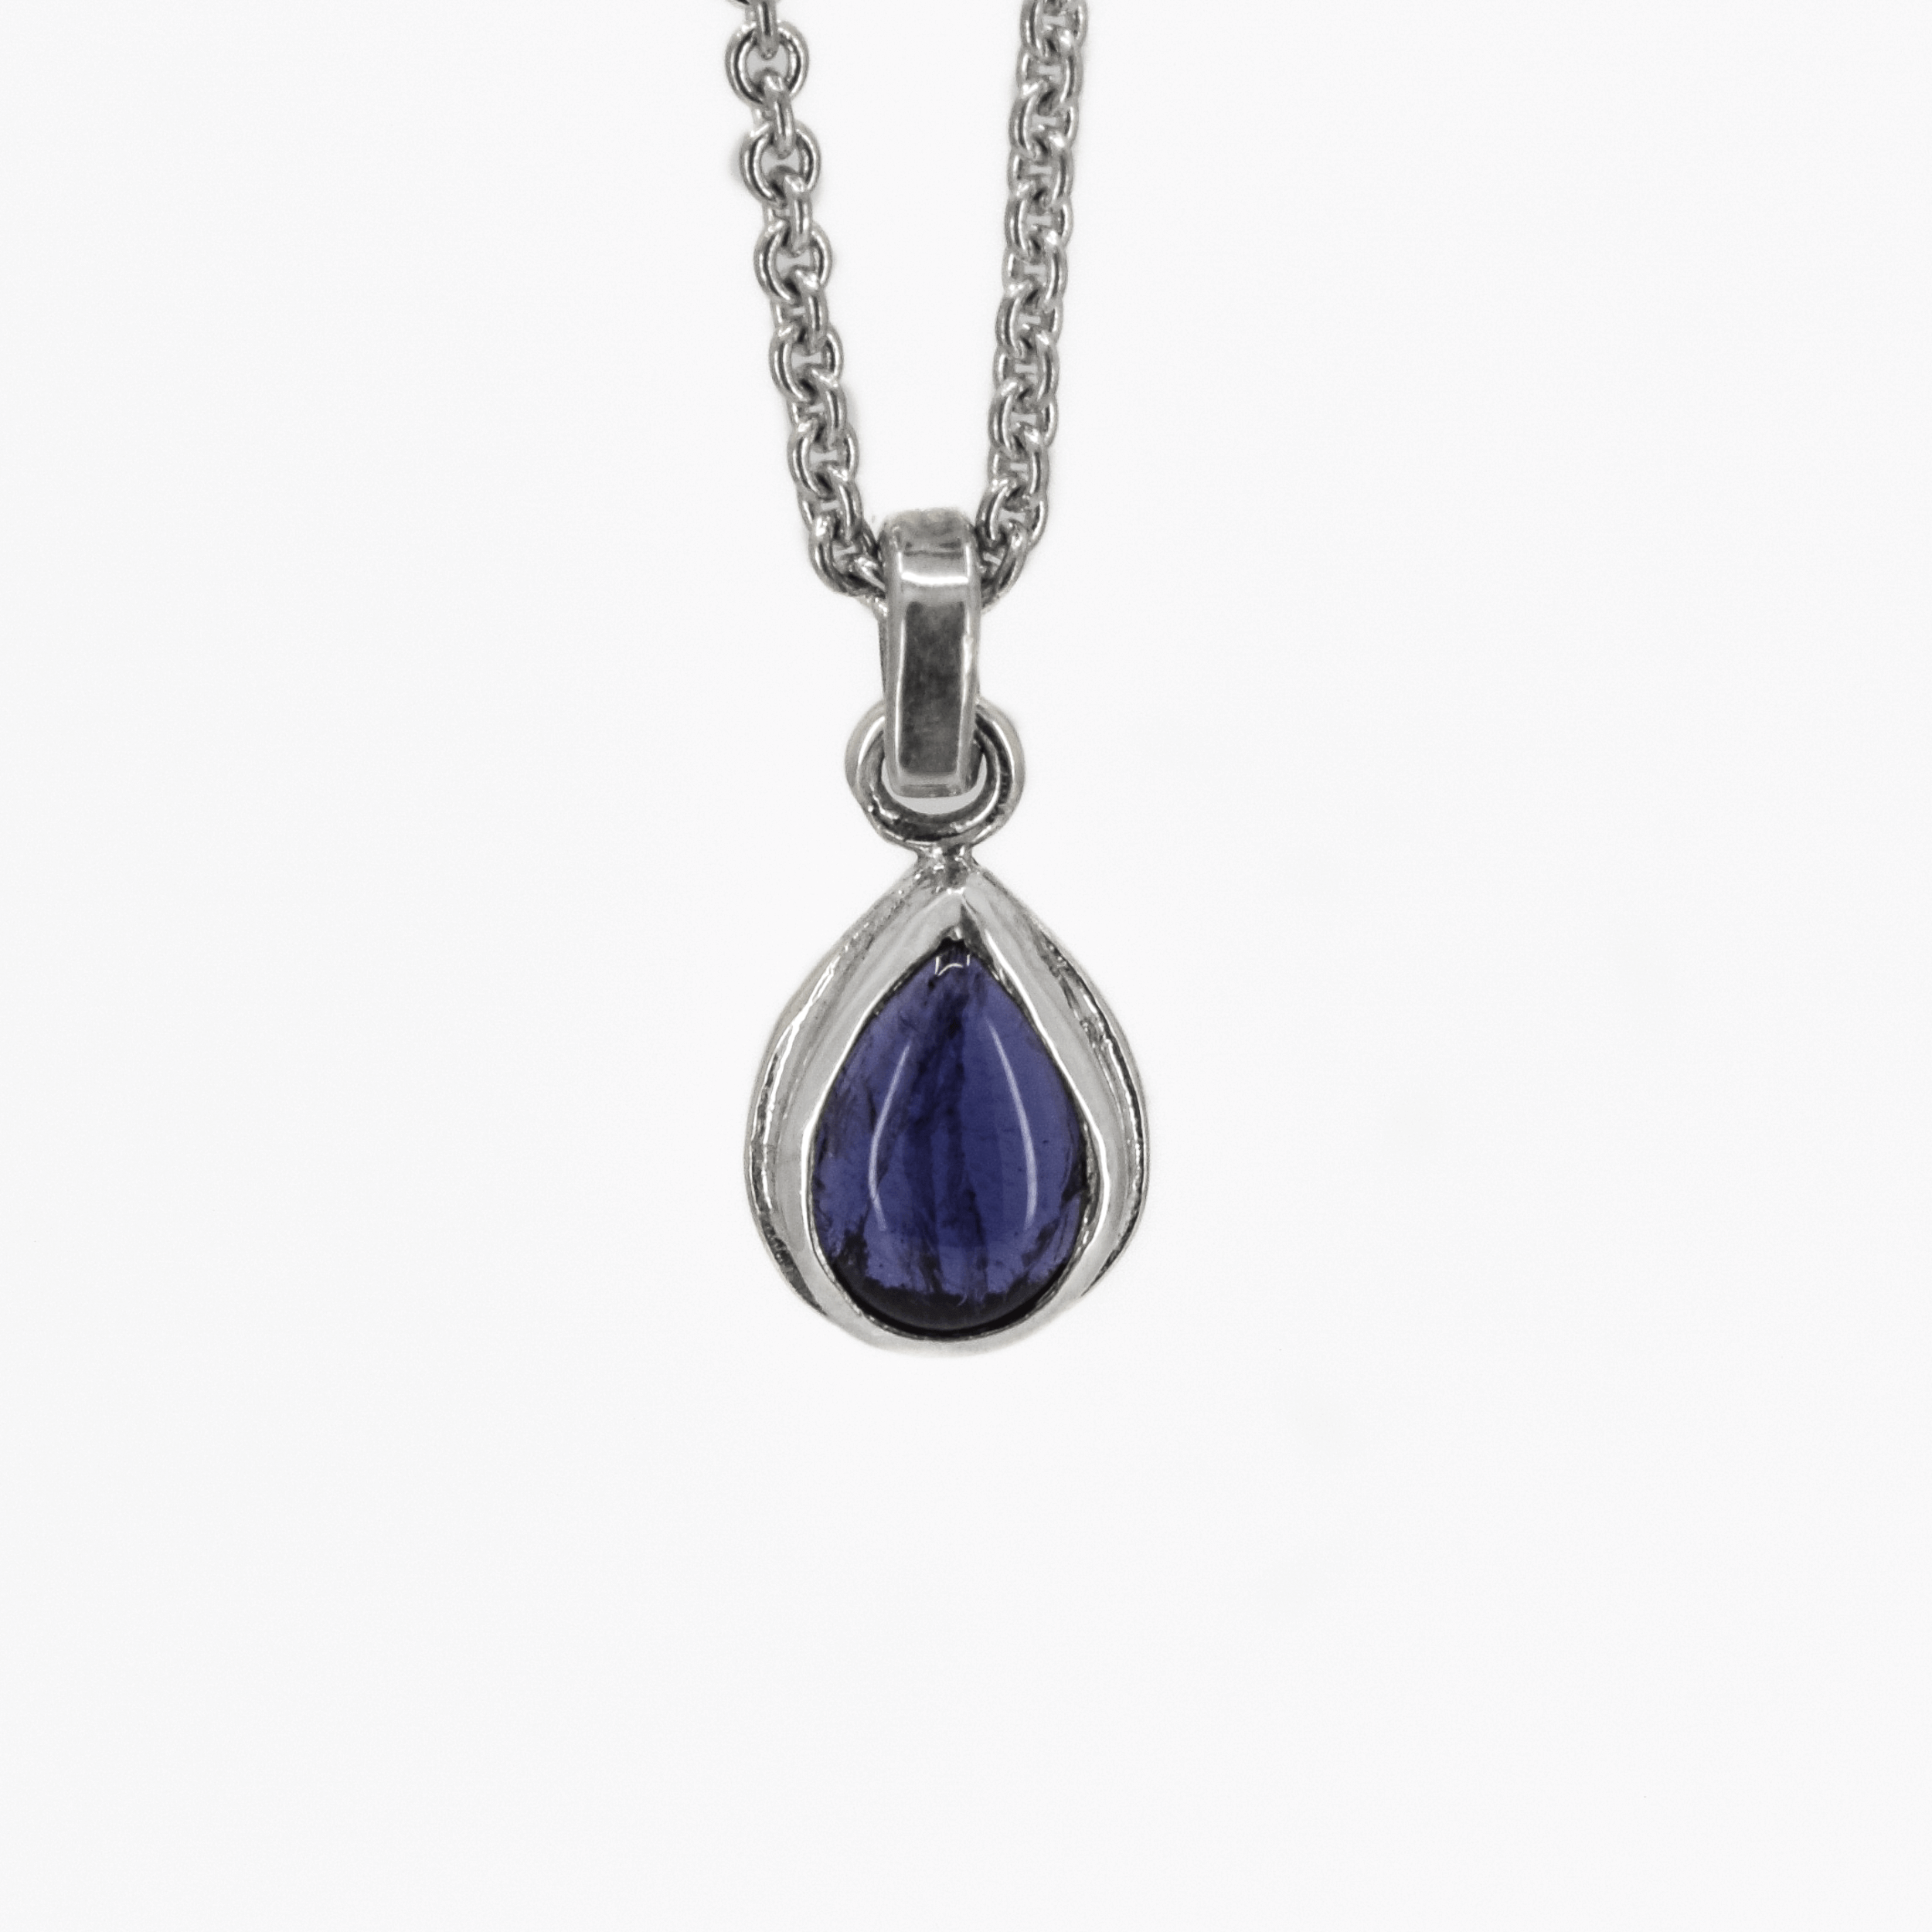 Teardrop shaped iolite pendant necklace in sterling silver hanging on a cable chain